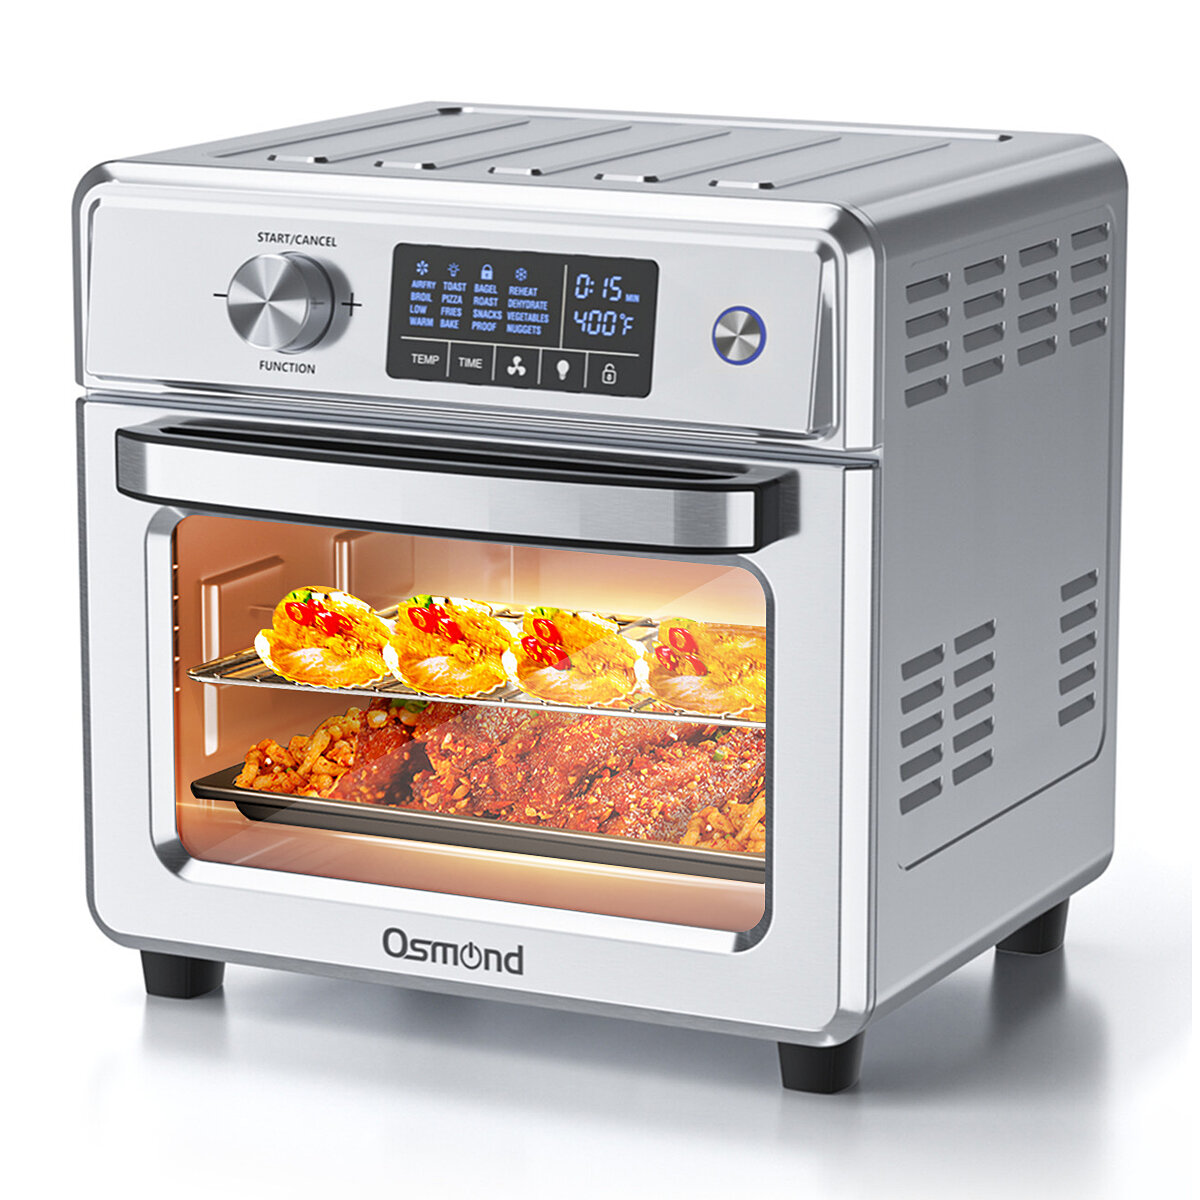 GE Digital Air Fry 8-in-1 Toaster Oven review - Reviewed